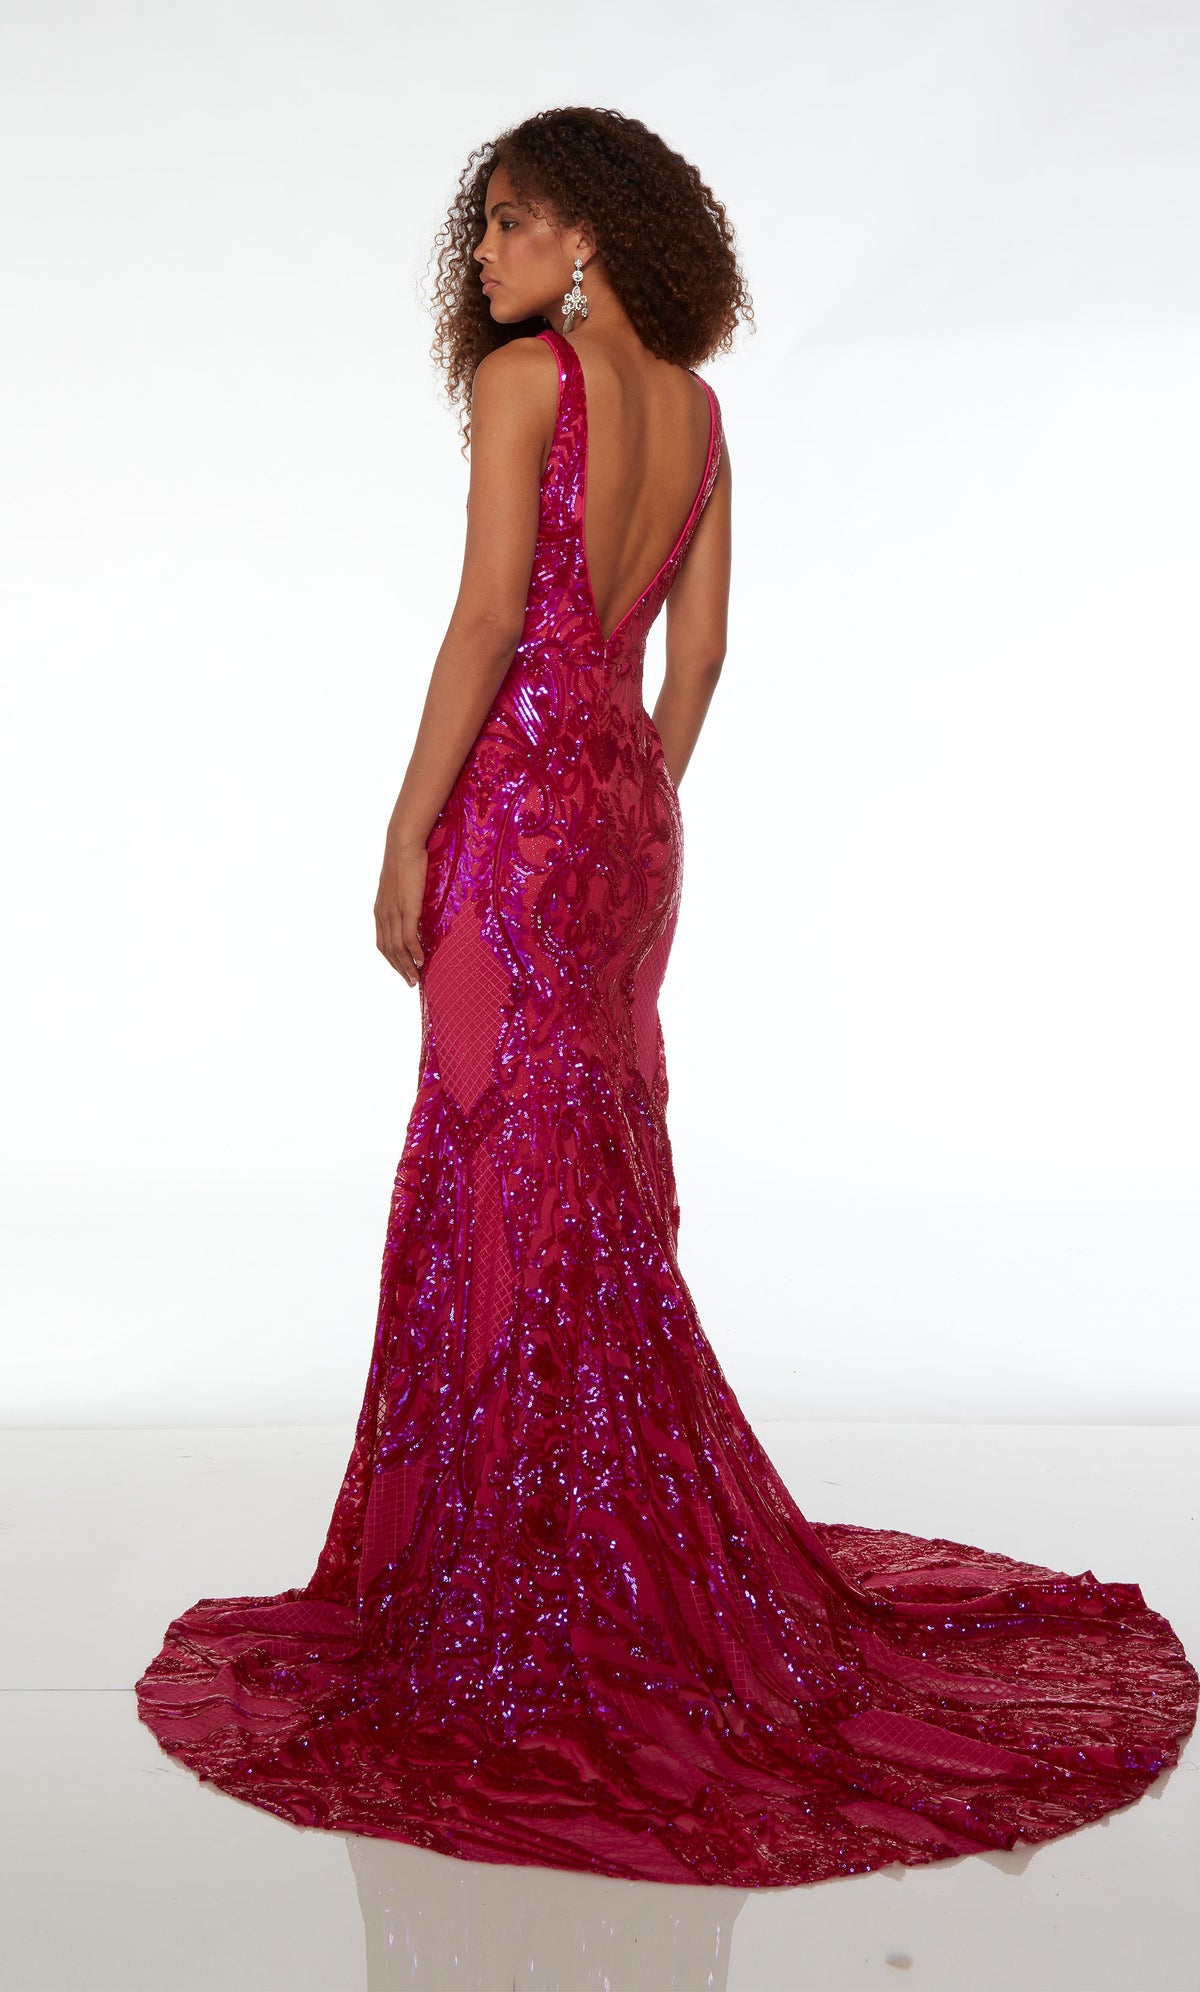 Raspberry pink formal dress: plunging neckline, illusion cutouts, paisley-patterned iridescent sequins, V-shaped back, and graceful train.